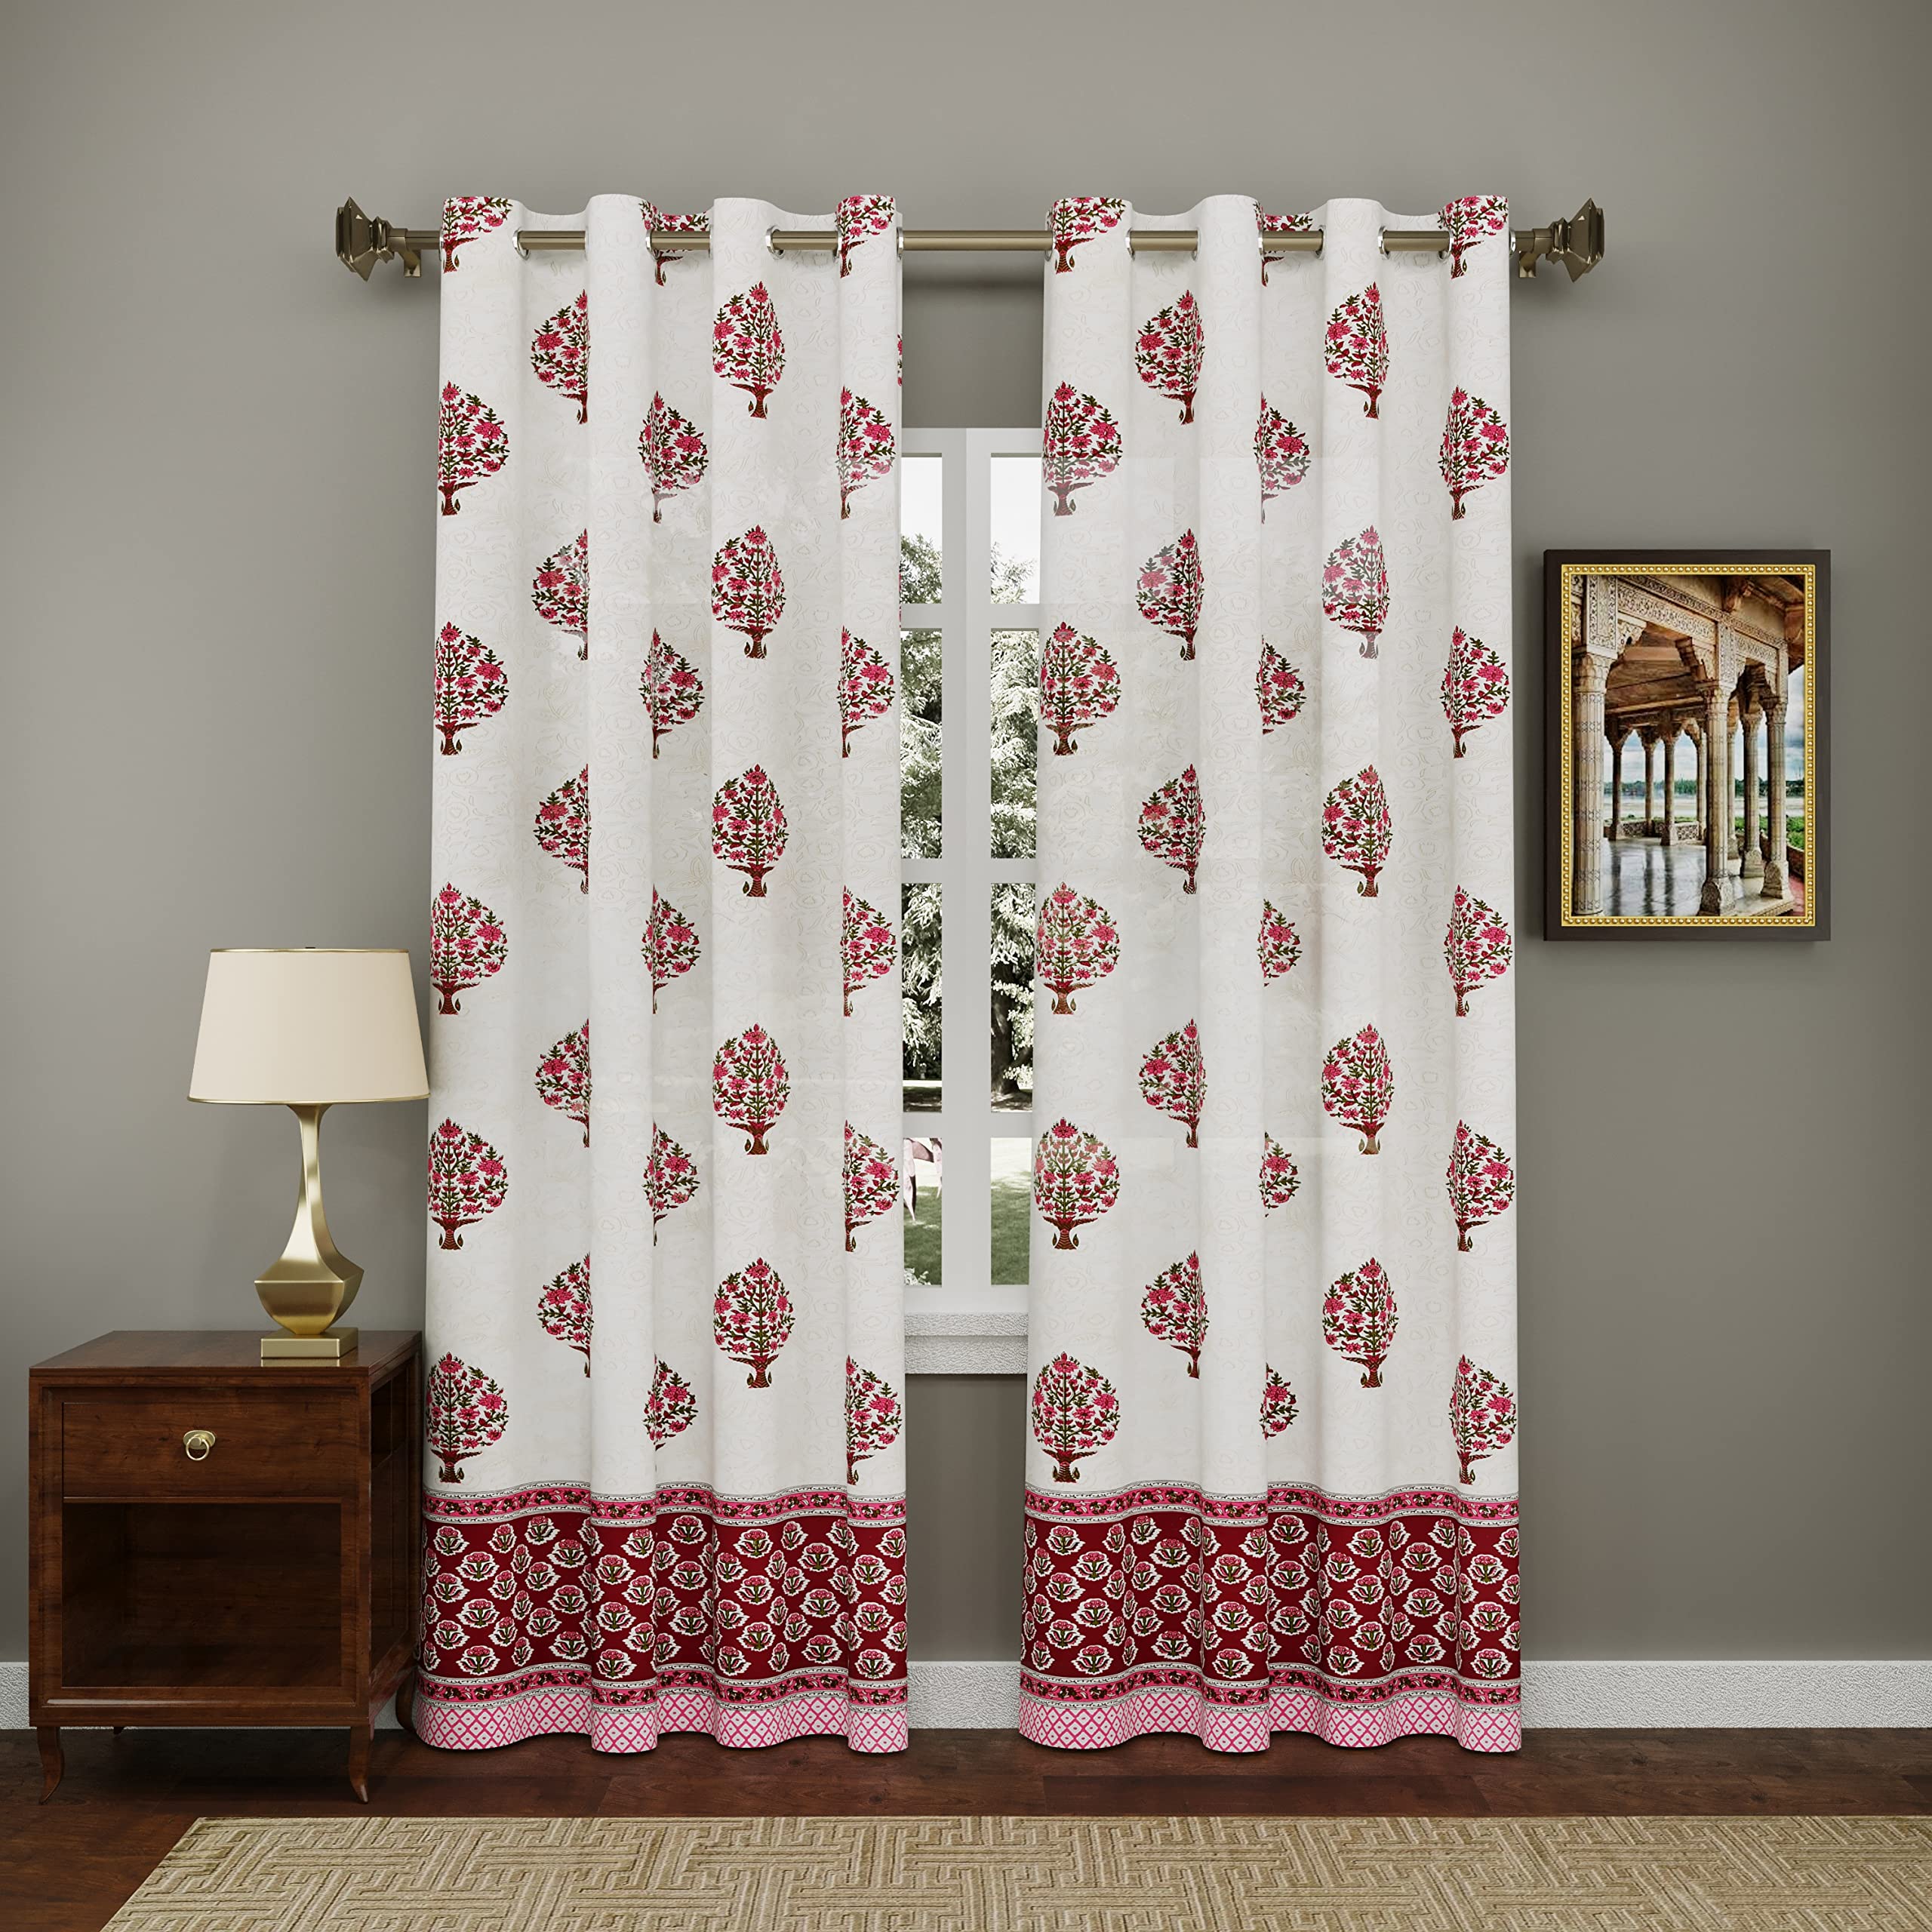 Buy Latest Curtains Online in Pakistan